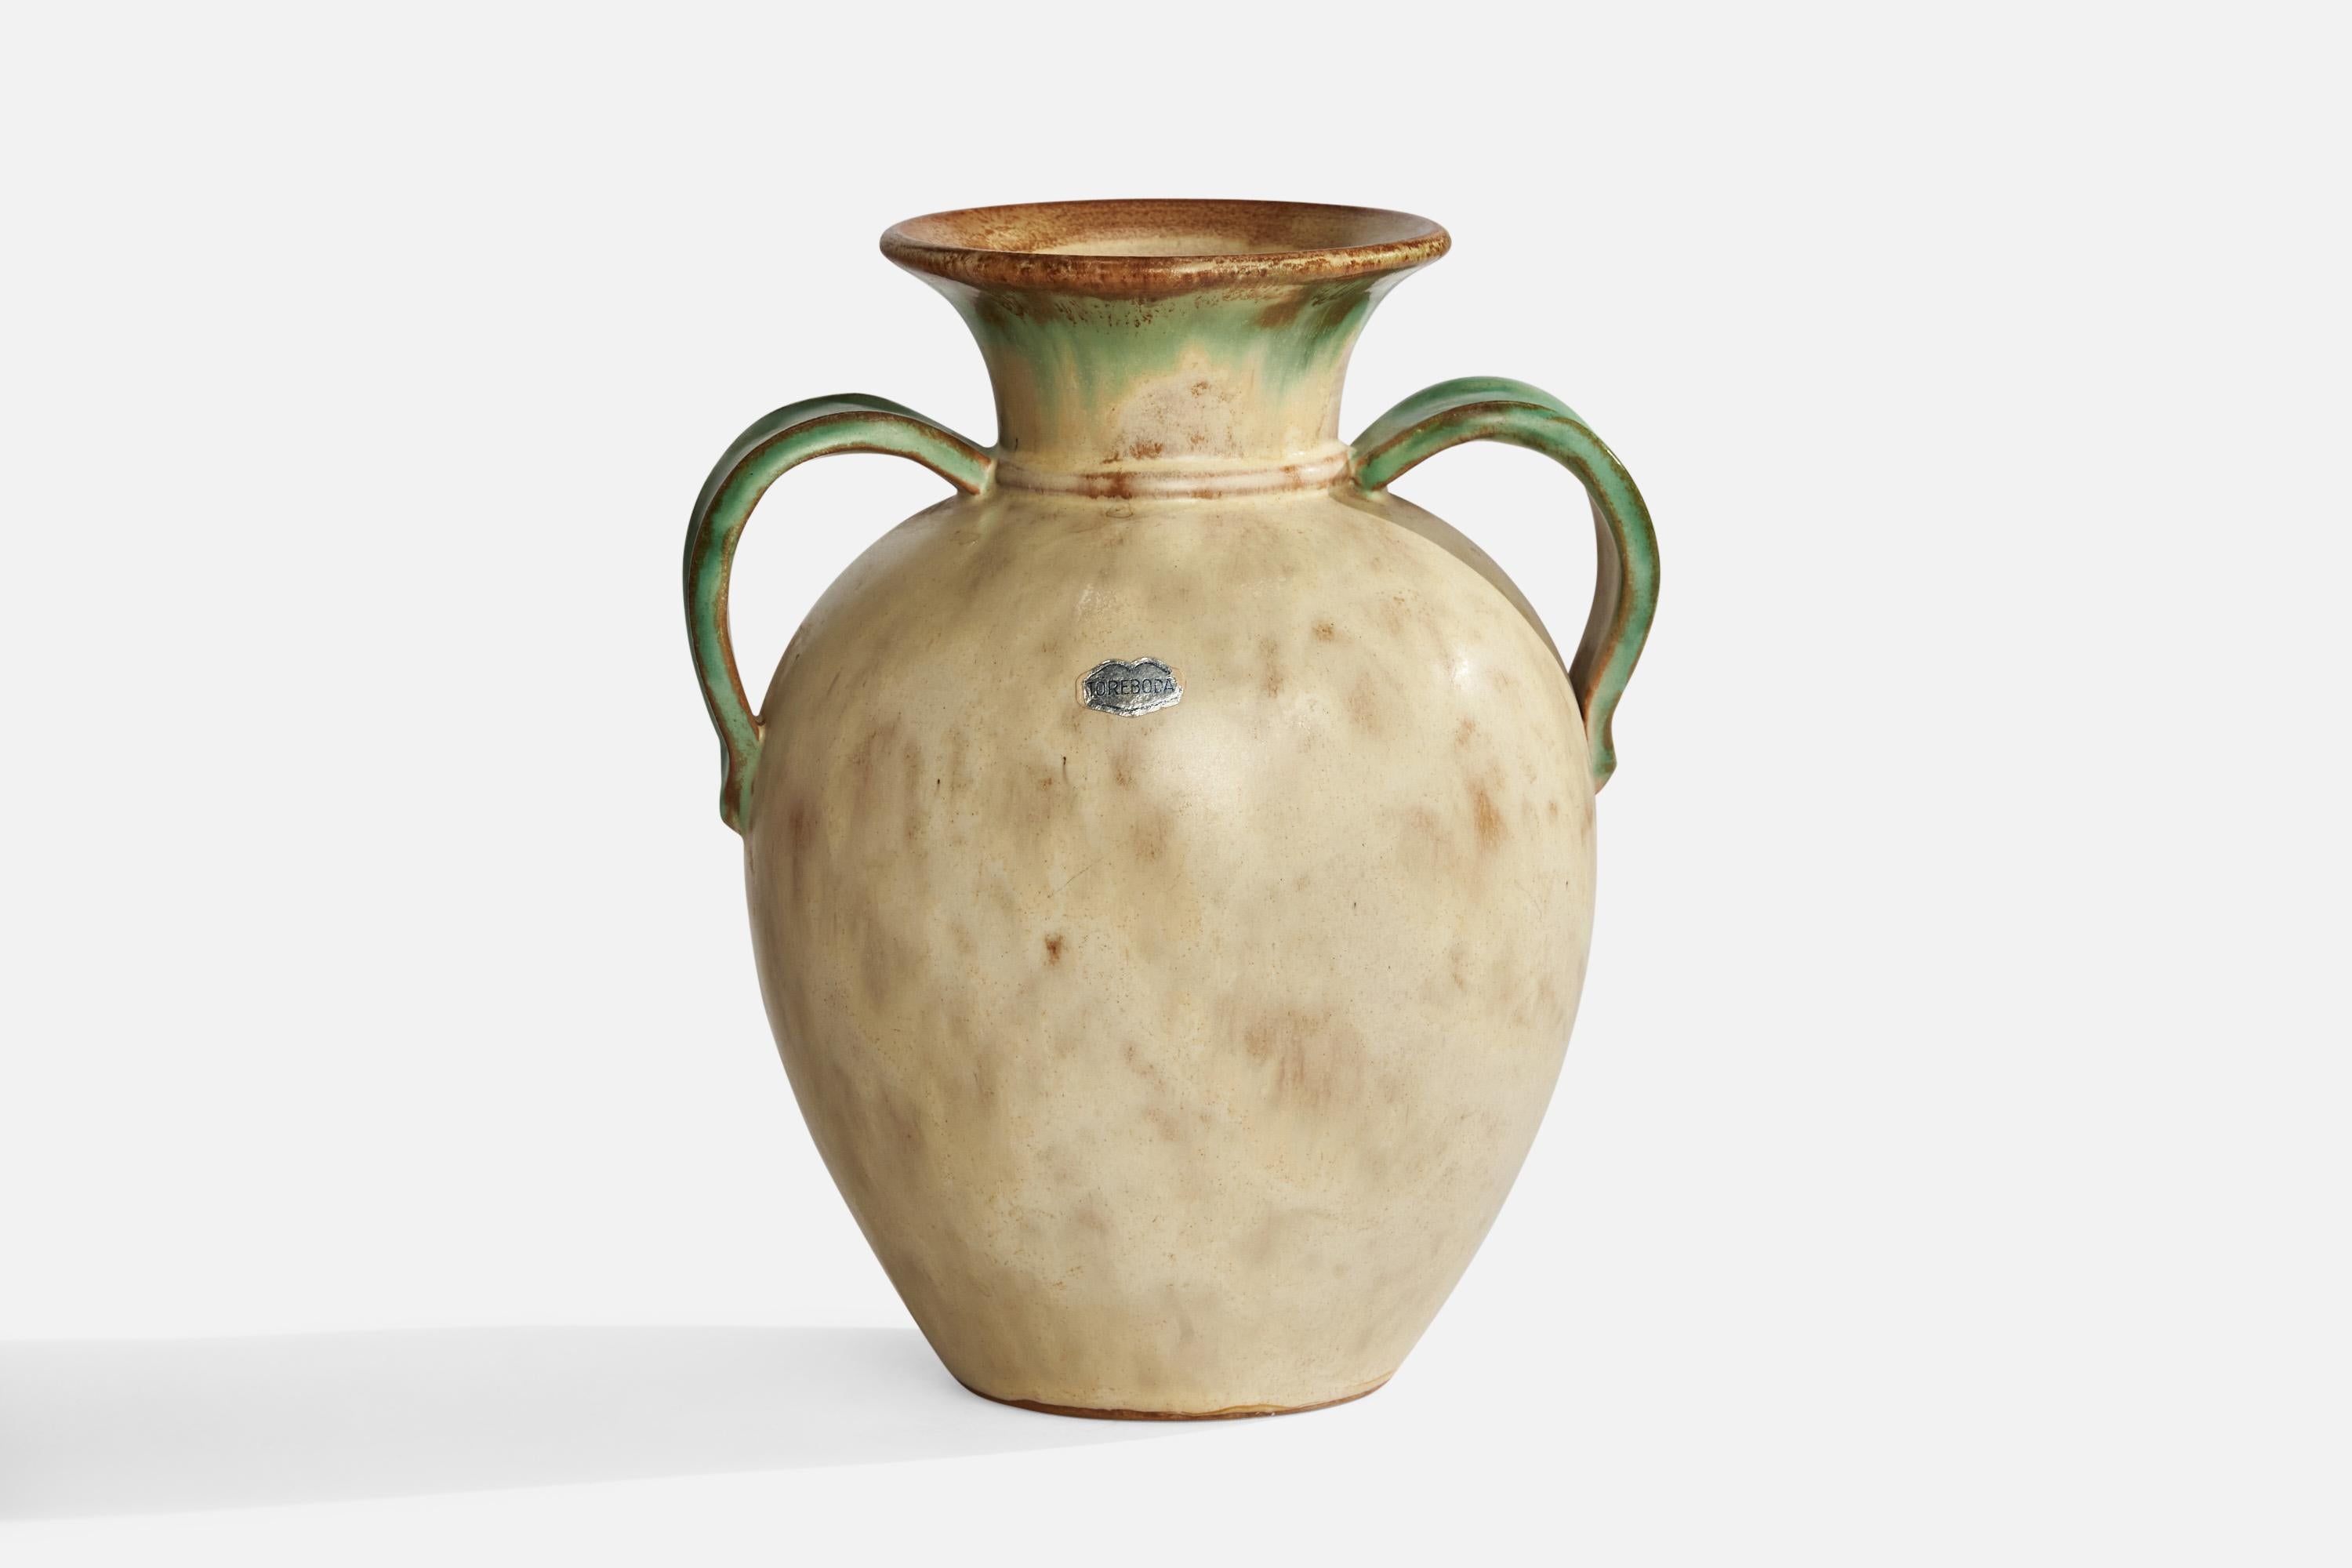 An off-white and green-glazed ceramic vase designed by Christer Heijl and produced by Töreboda Keramik, Sweden, 1930s.